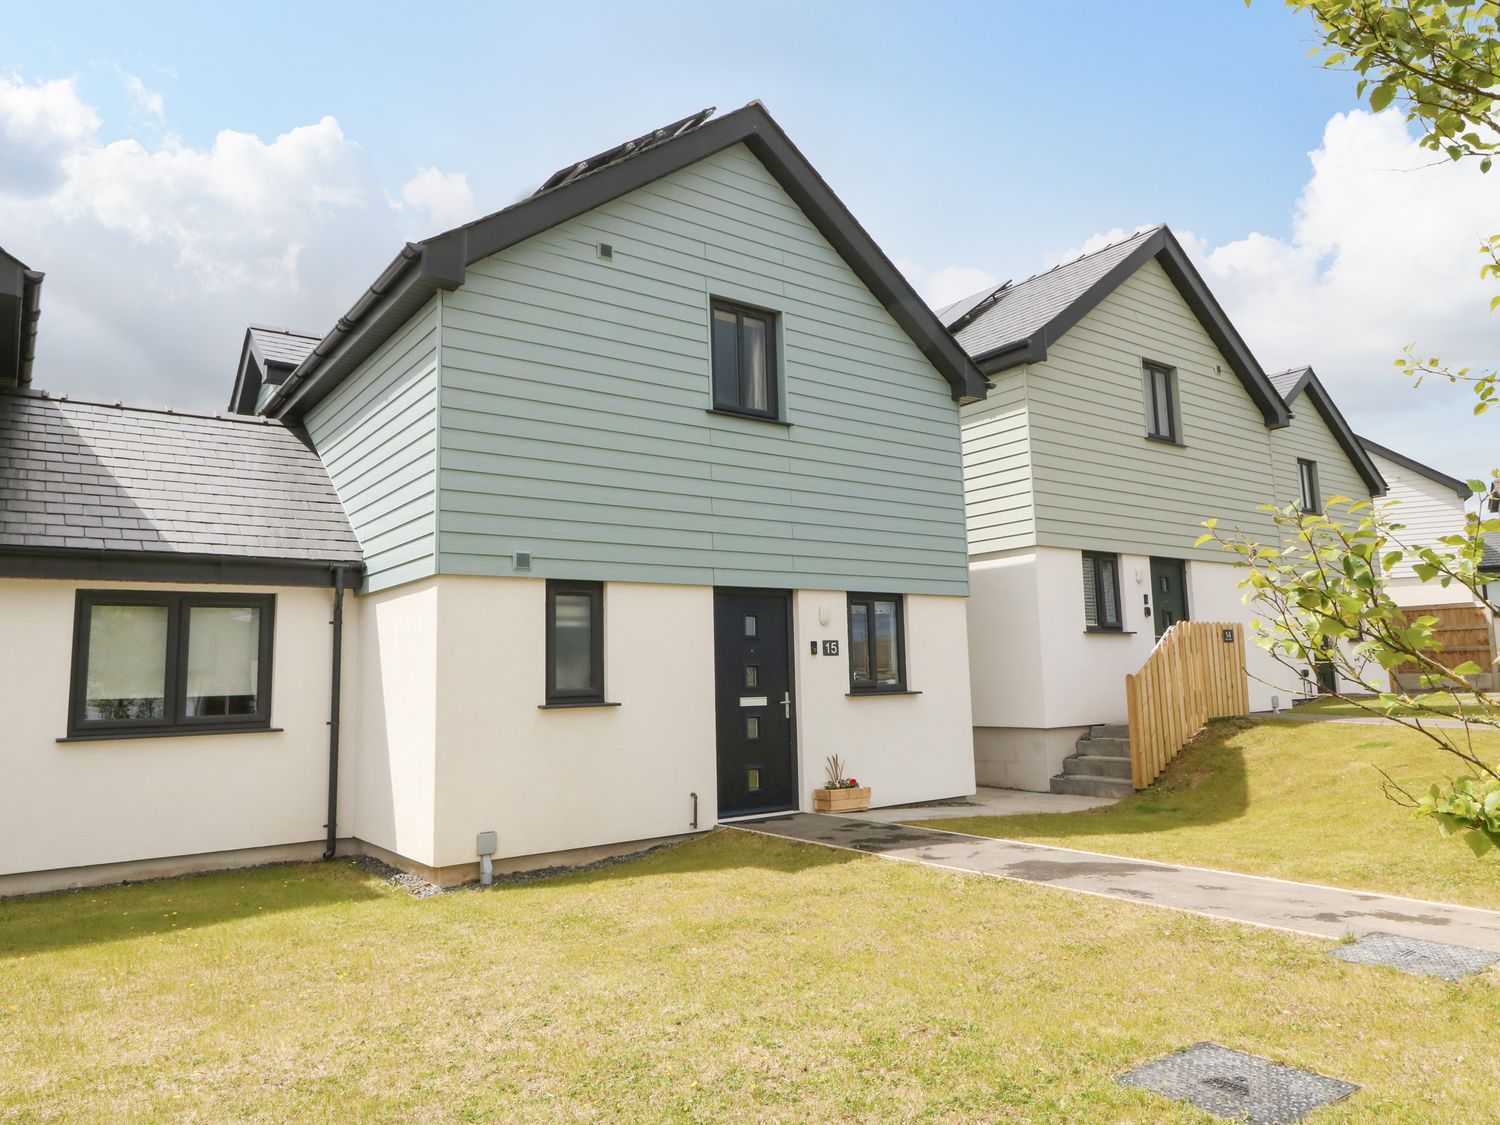 15 Parc Delfryn - Anglesey - 1073246 - photo 1